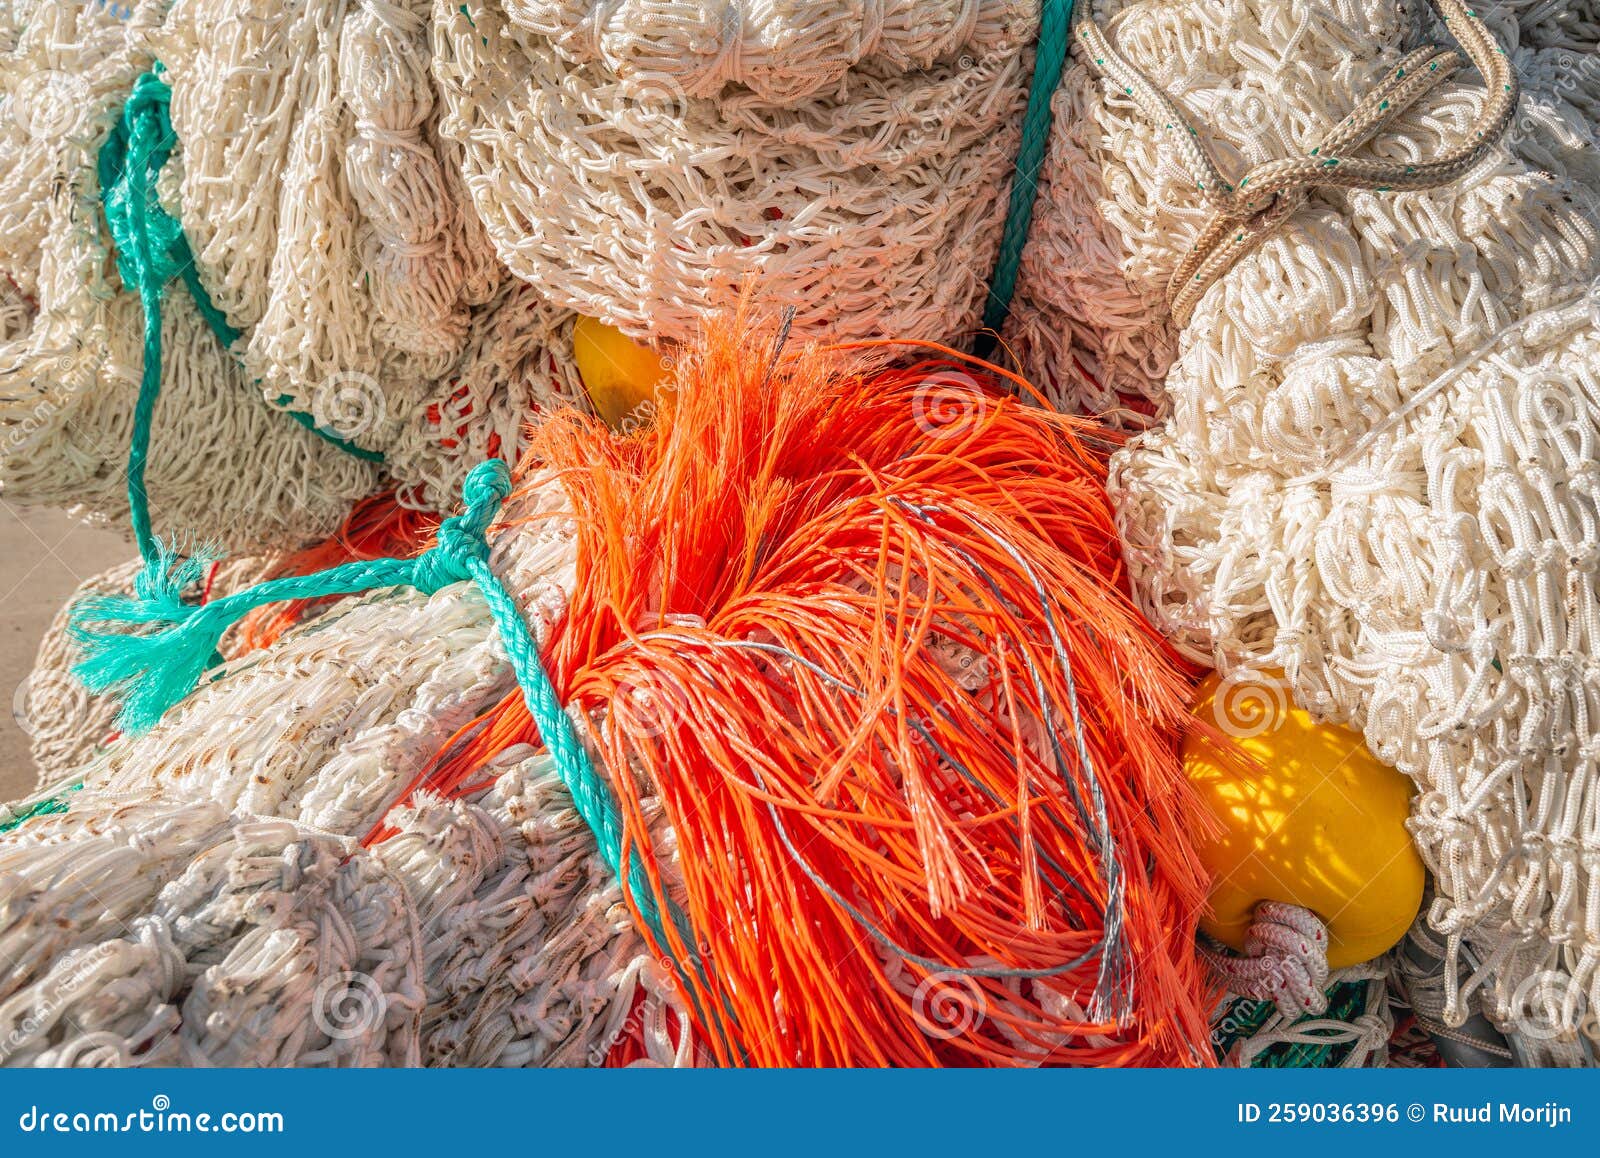 Part of a Big Fishing Net from Close Stock Photo - Image of details, line:  259036396